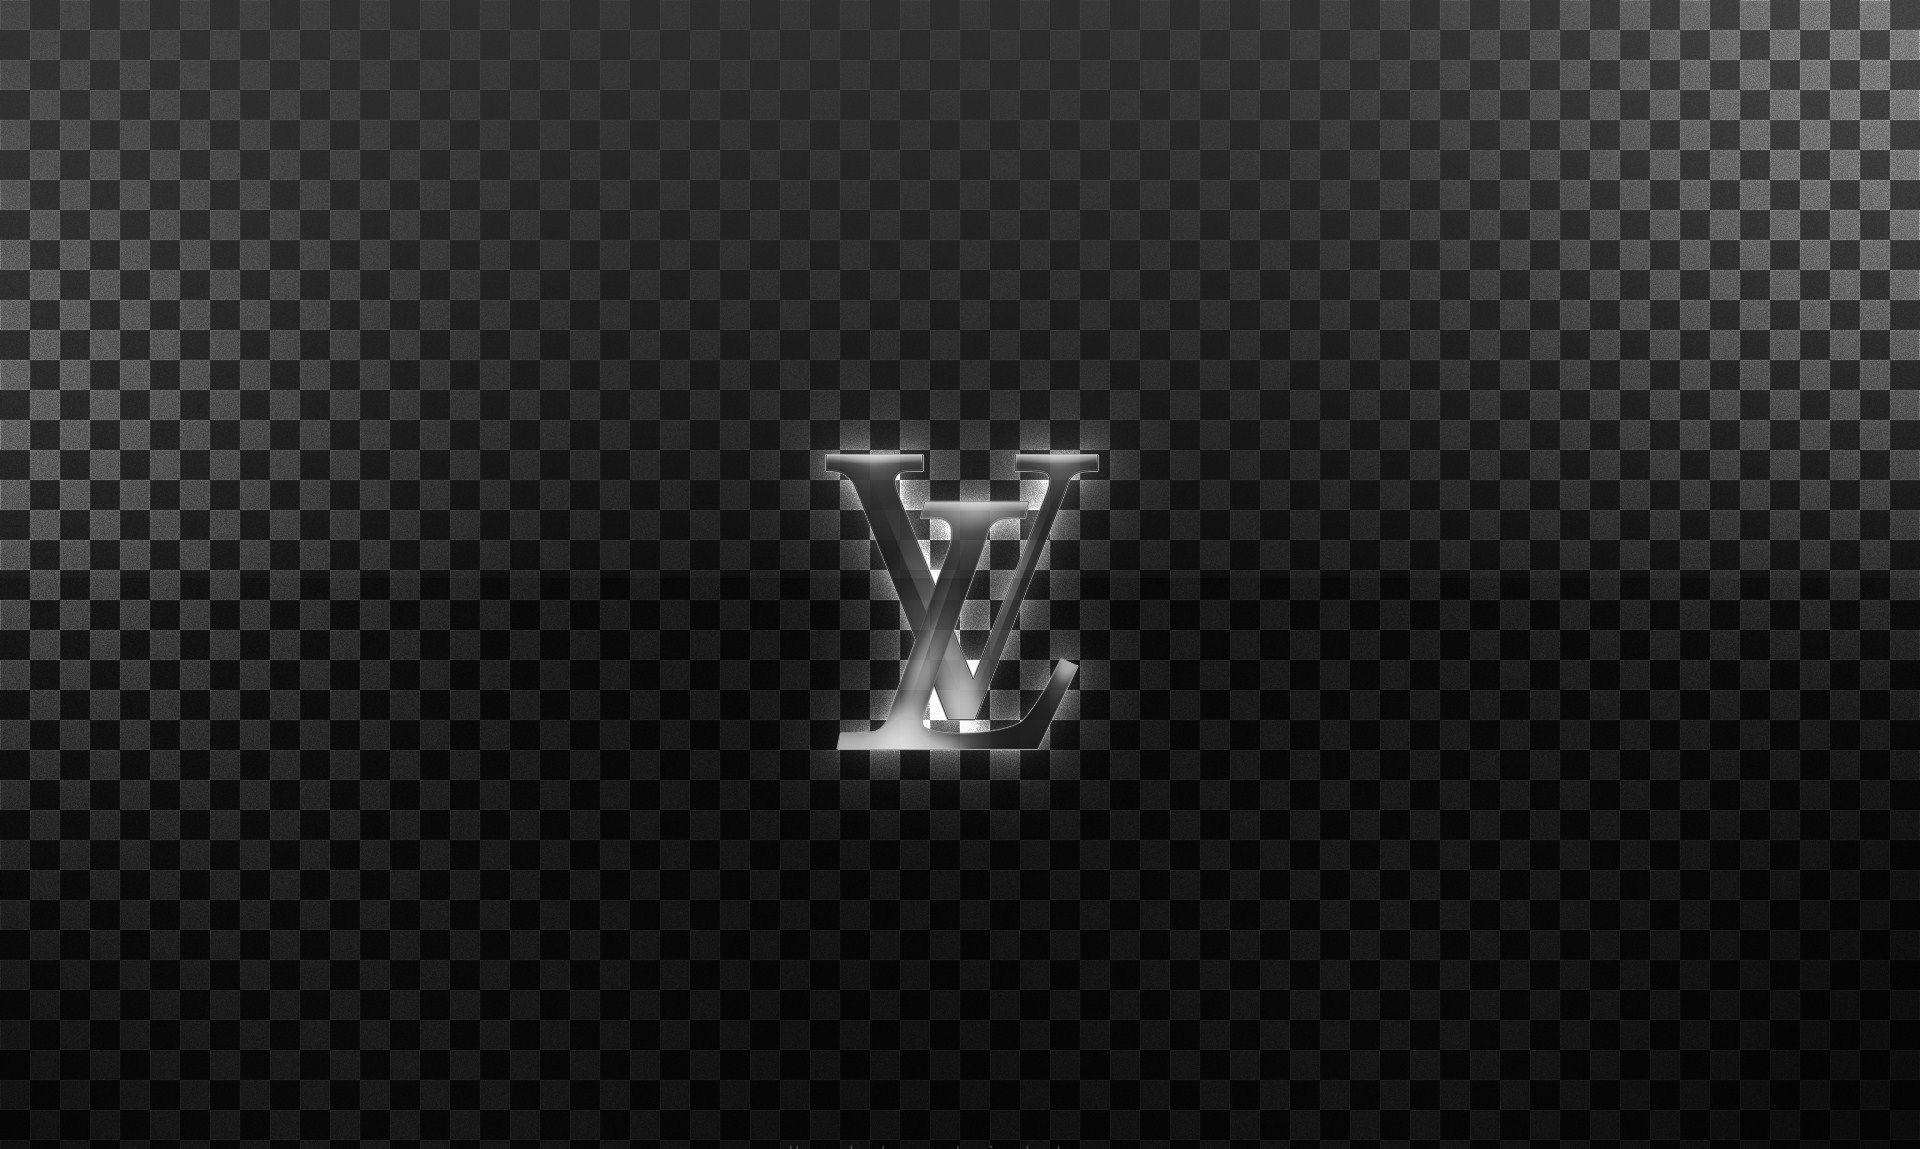 Louis Vuitton Wallpapers - KoLPaPer - Awesome Free HD Wallpapers